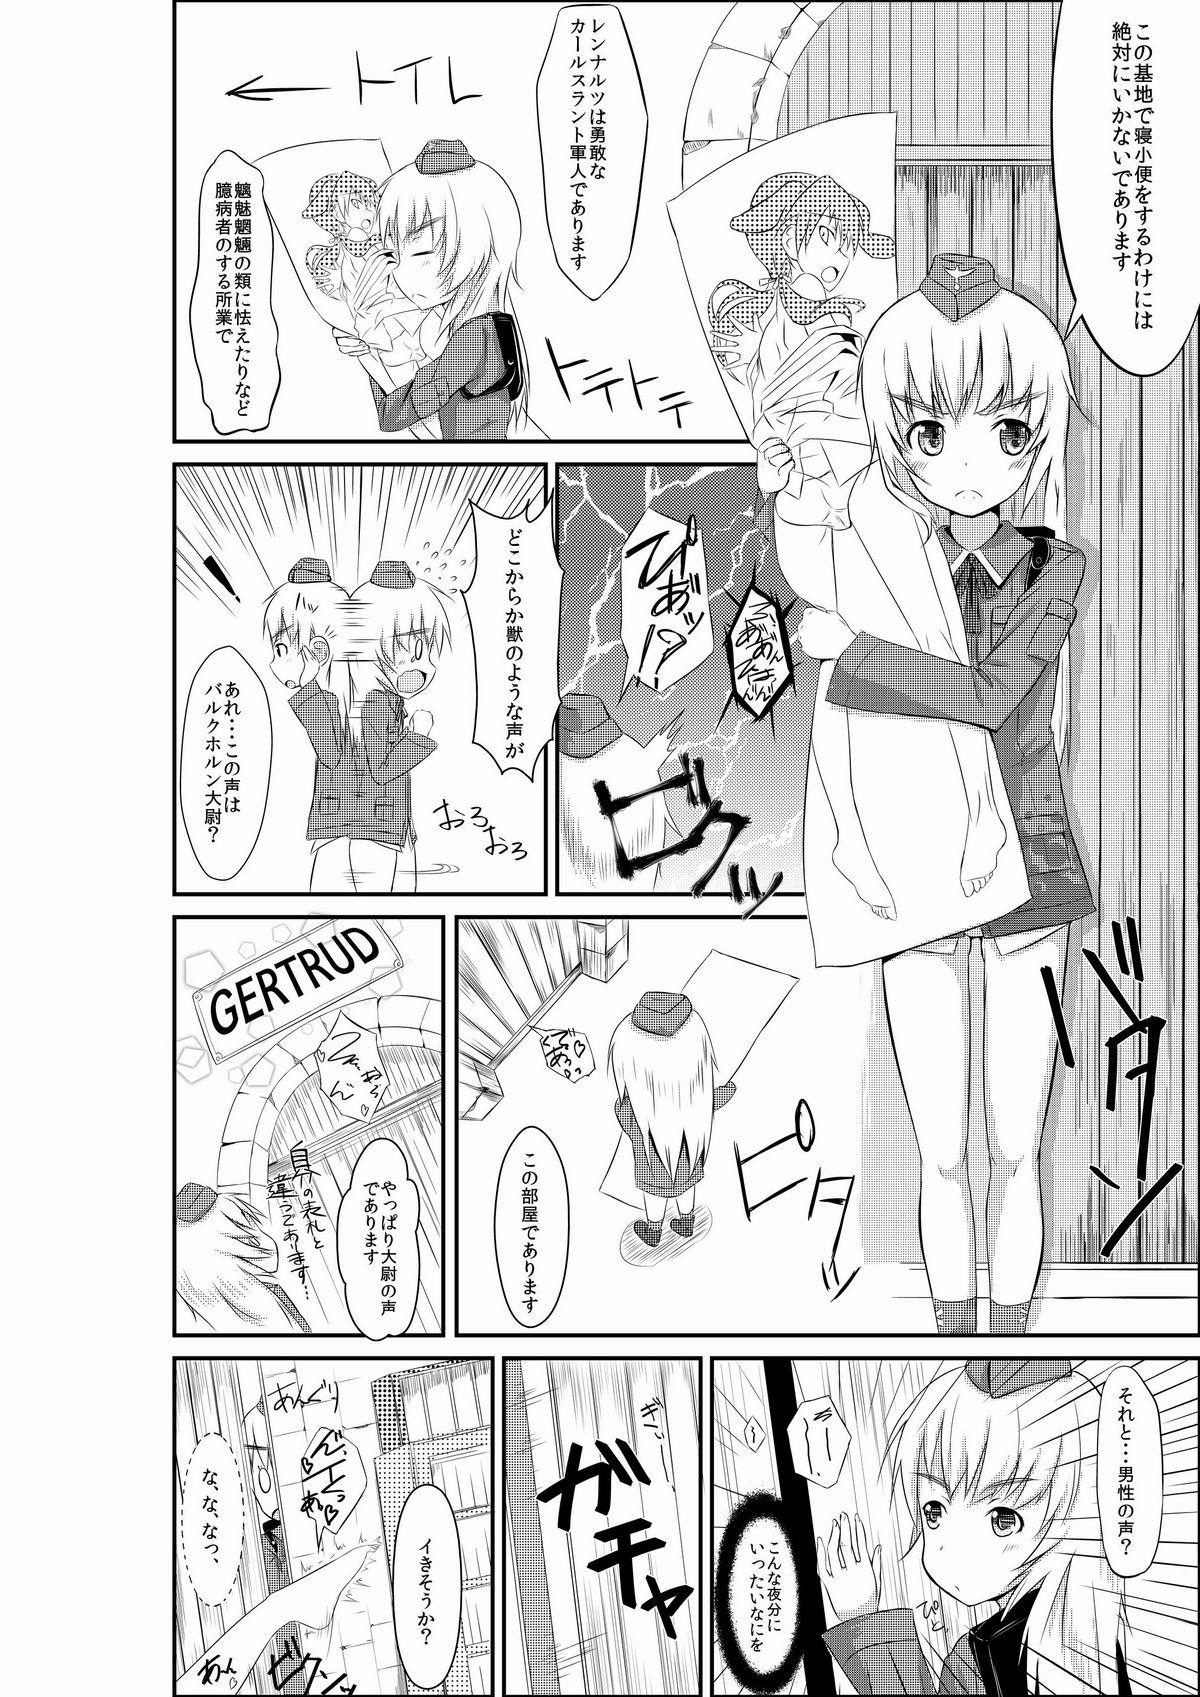 Mom 練習 お姉ちゃんとヘルマちゃん - Strike witches Super Hot Porn - Page 2